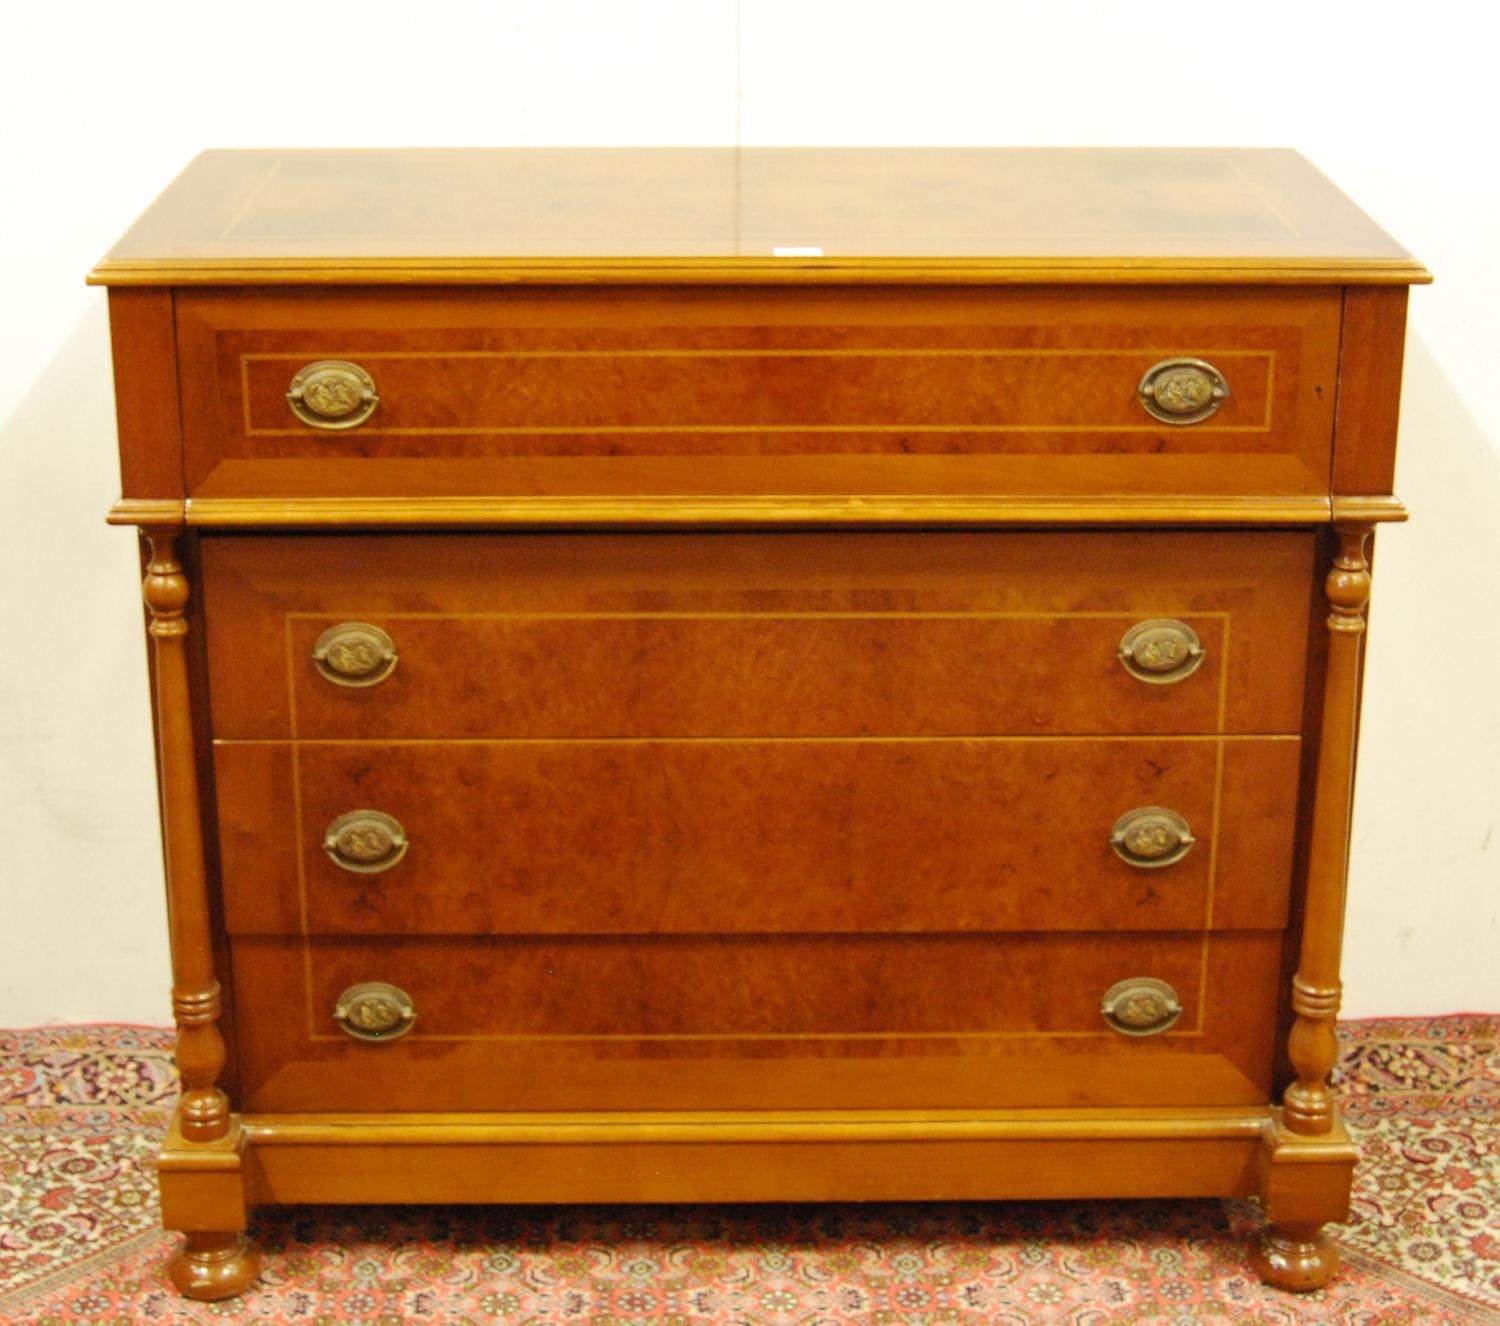 French-style reproduction walnut secrétaire chest of drawers, with a fall front secrétaire drawer to